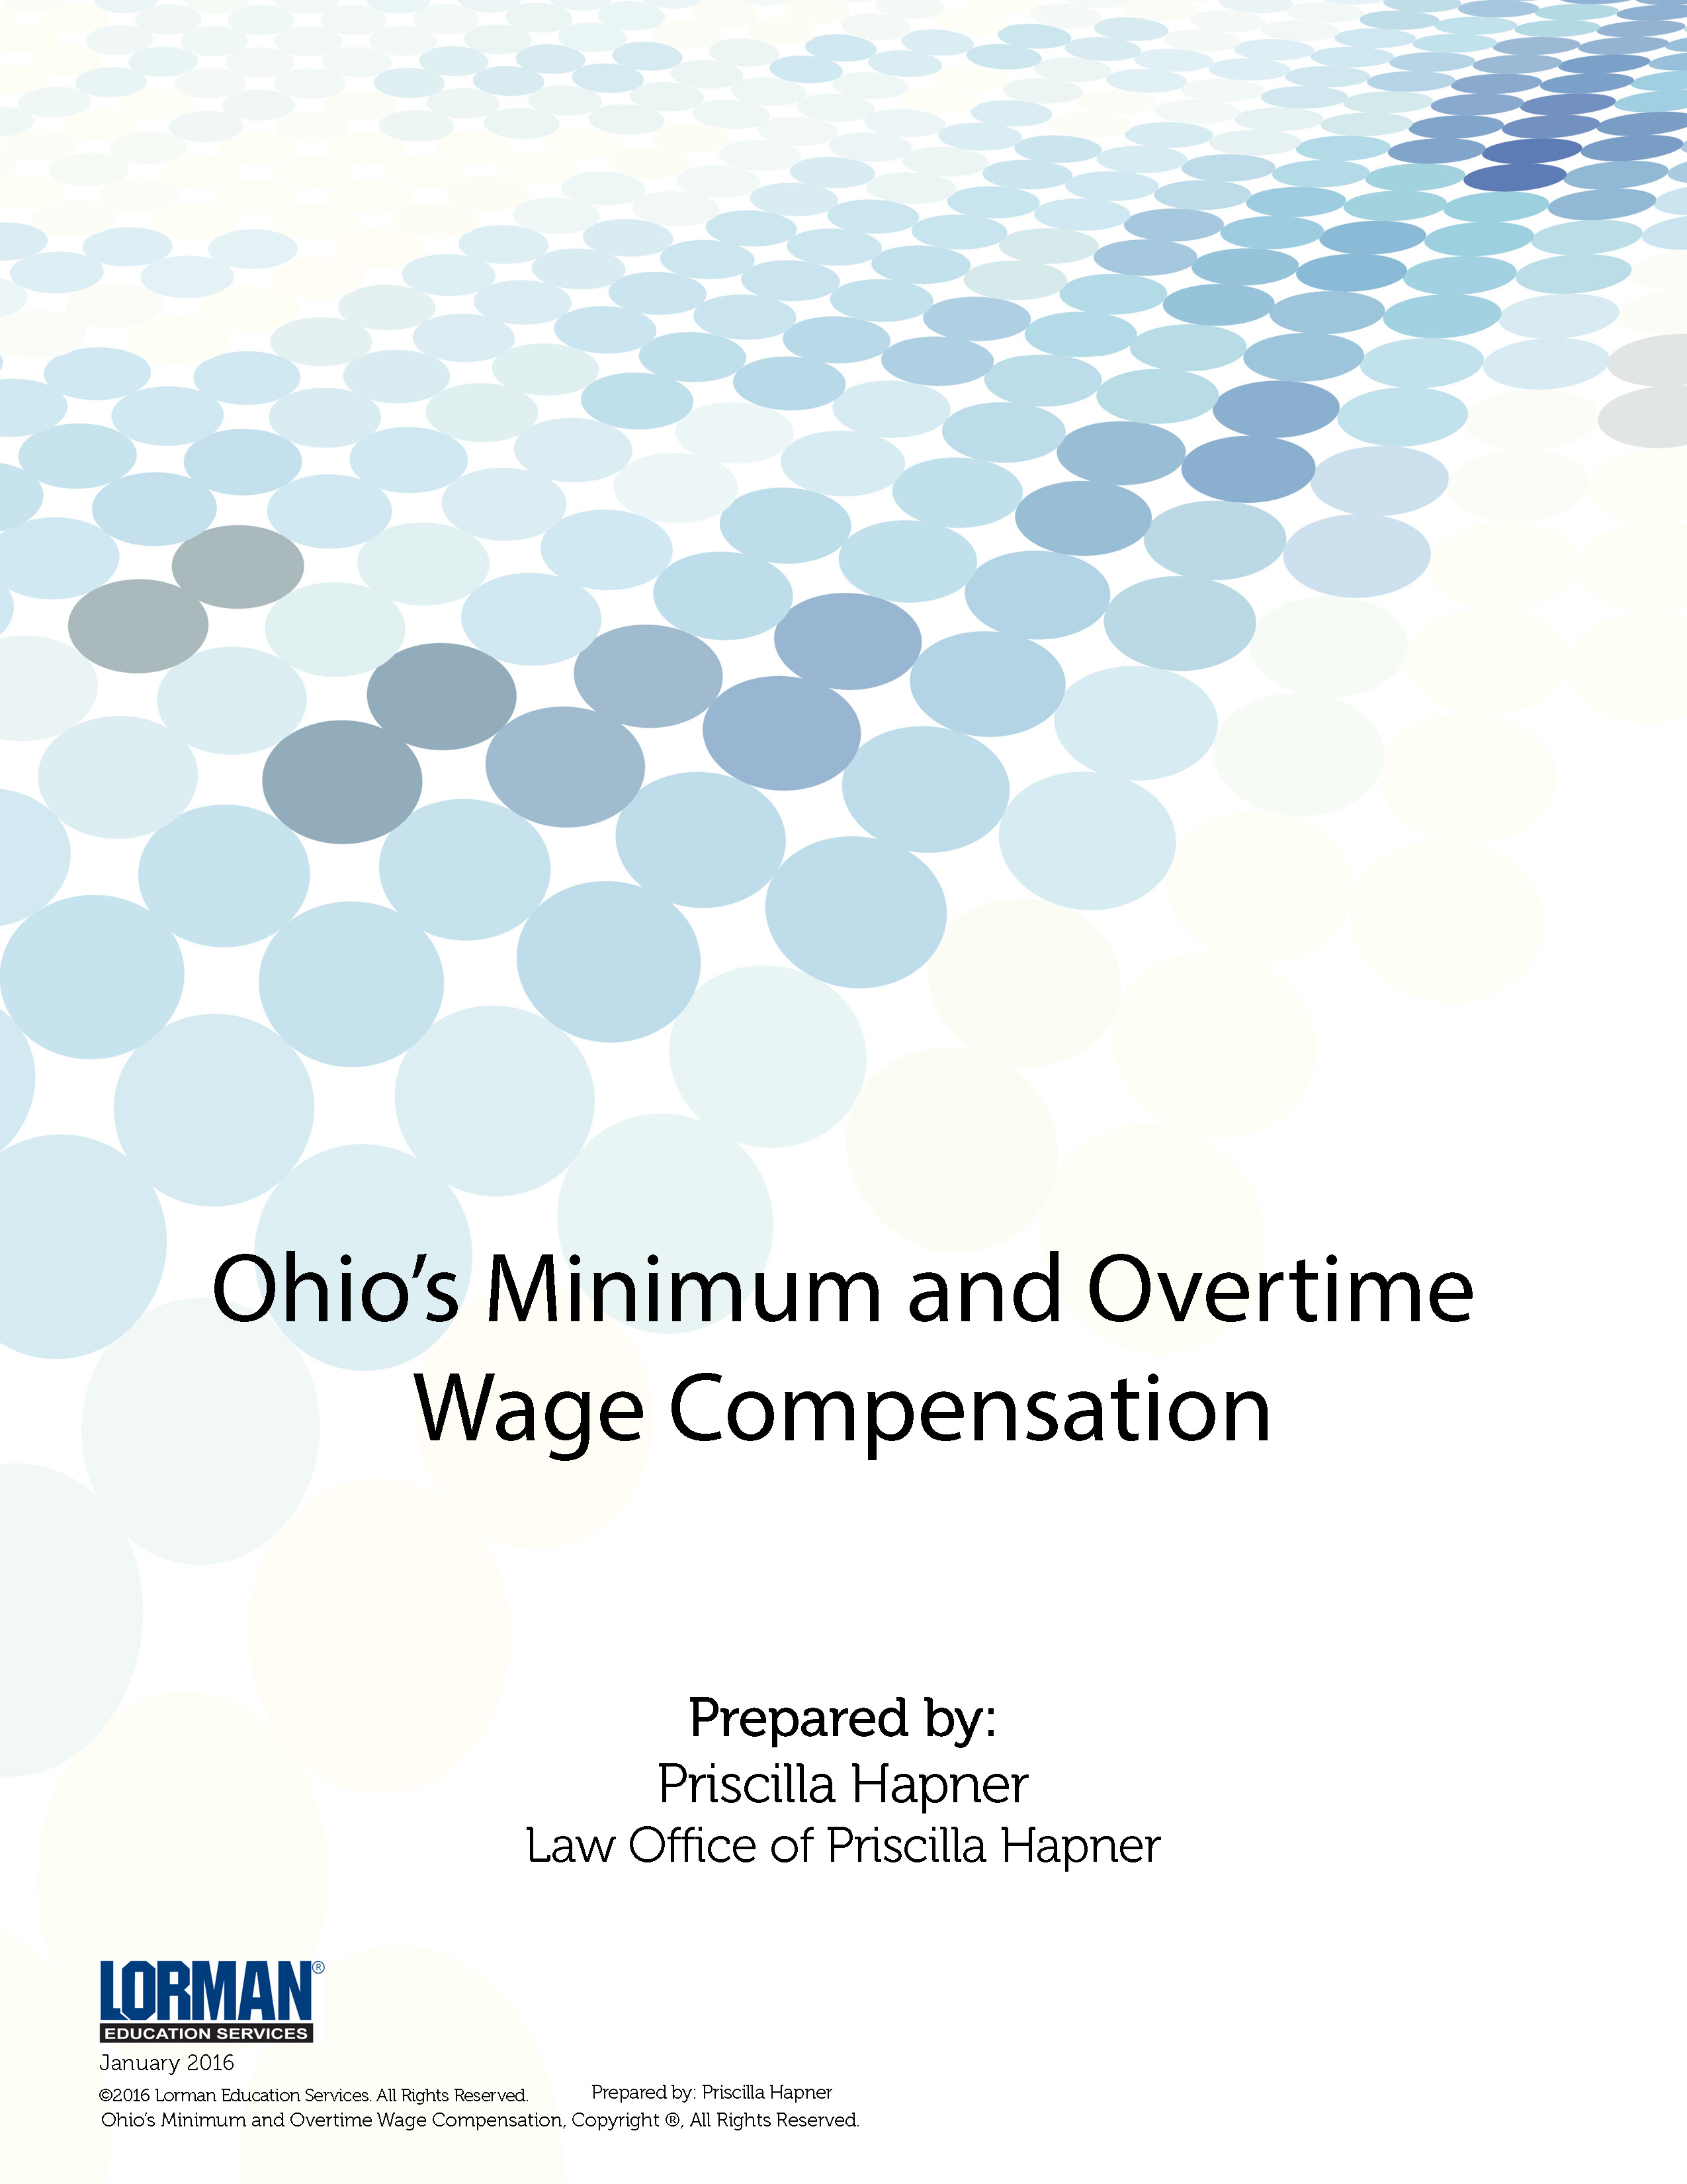 Ohios Minimum and Overtime Wage Compensation